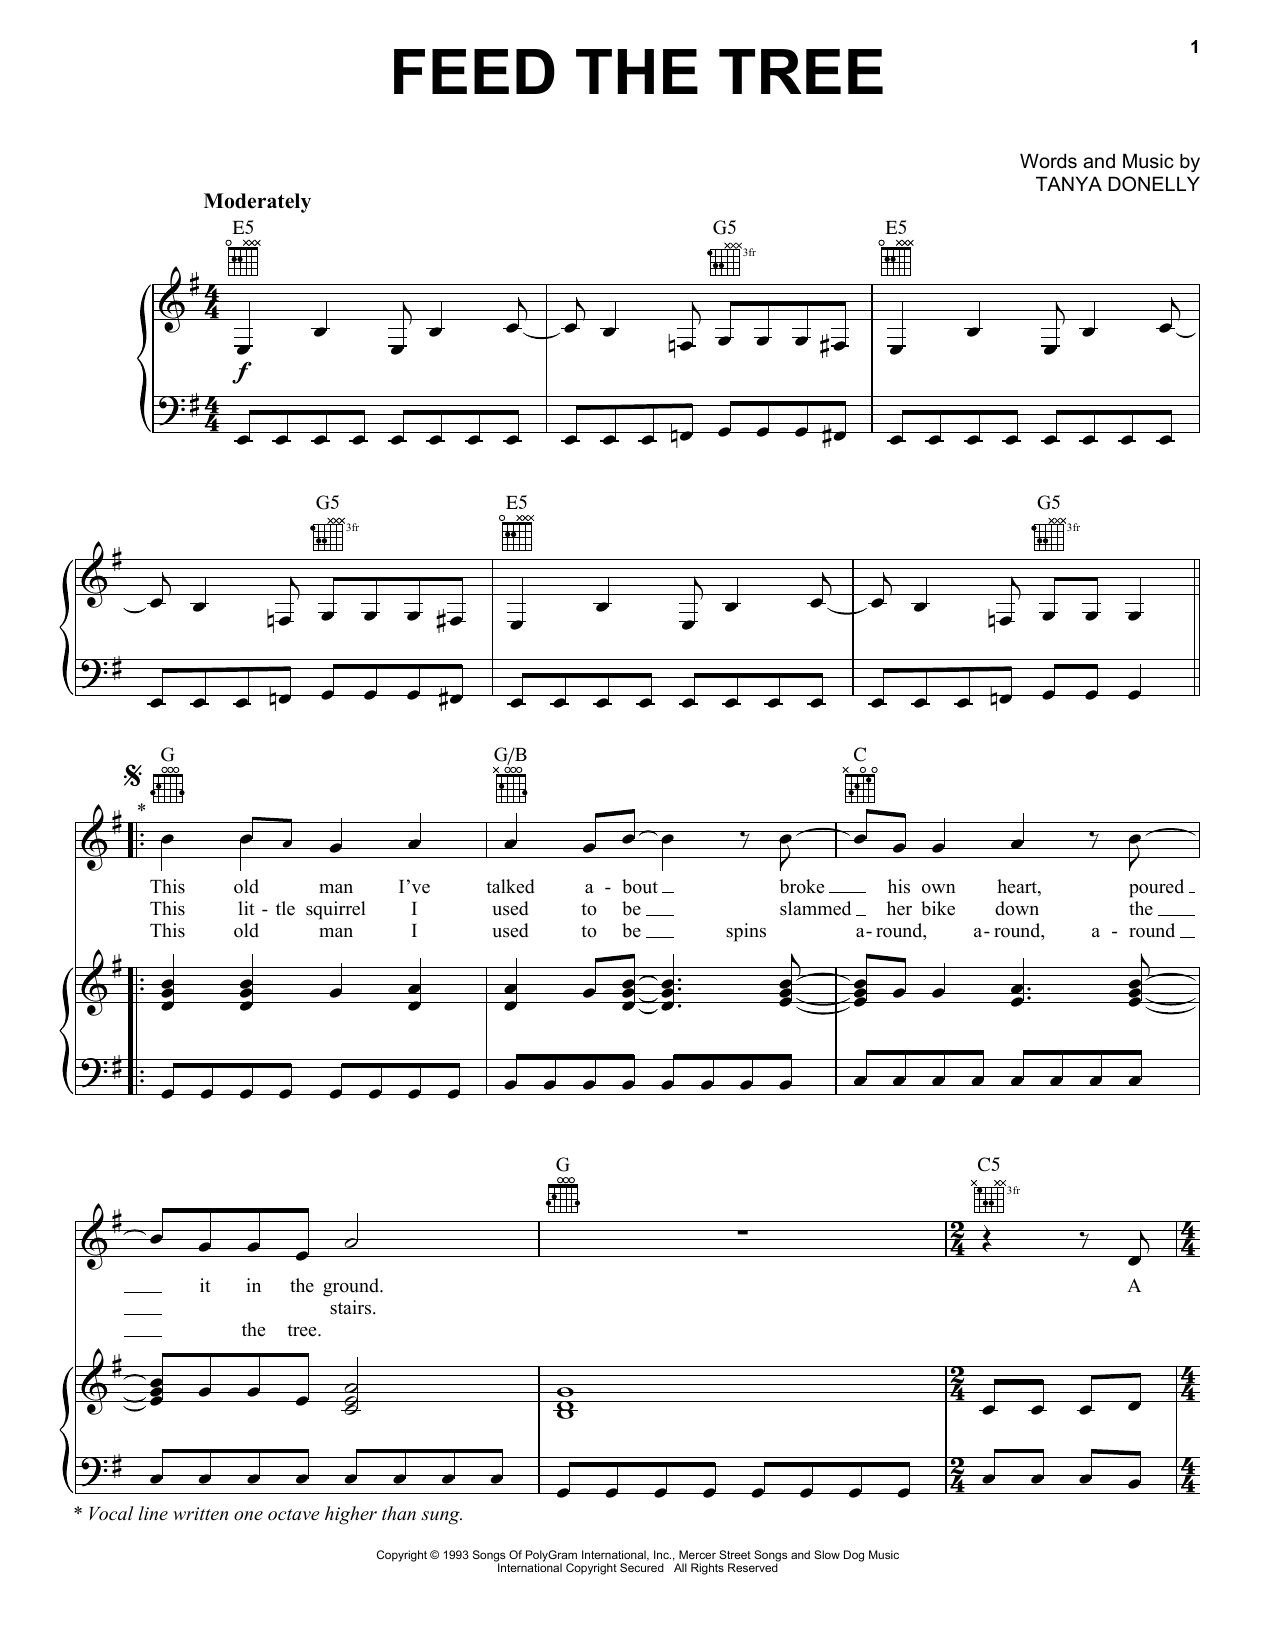 Download Belly Feed The Tree Sheet Music